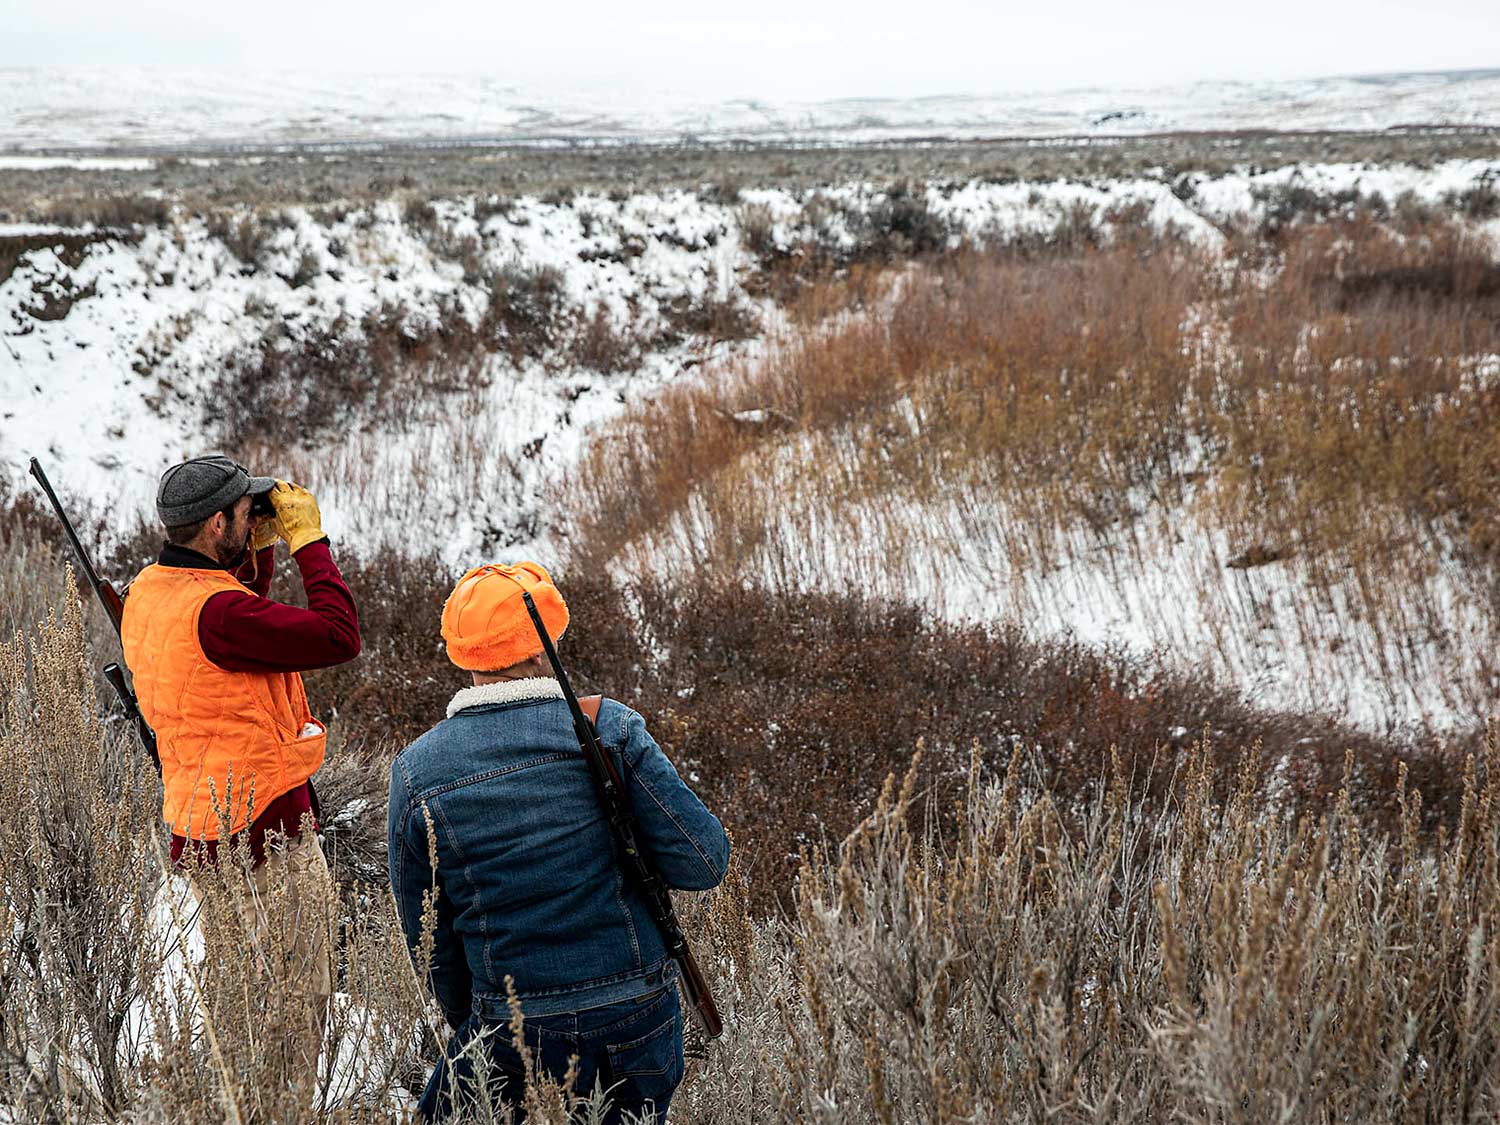 Two hunters scout an open, snow covered plain.